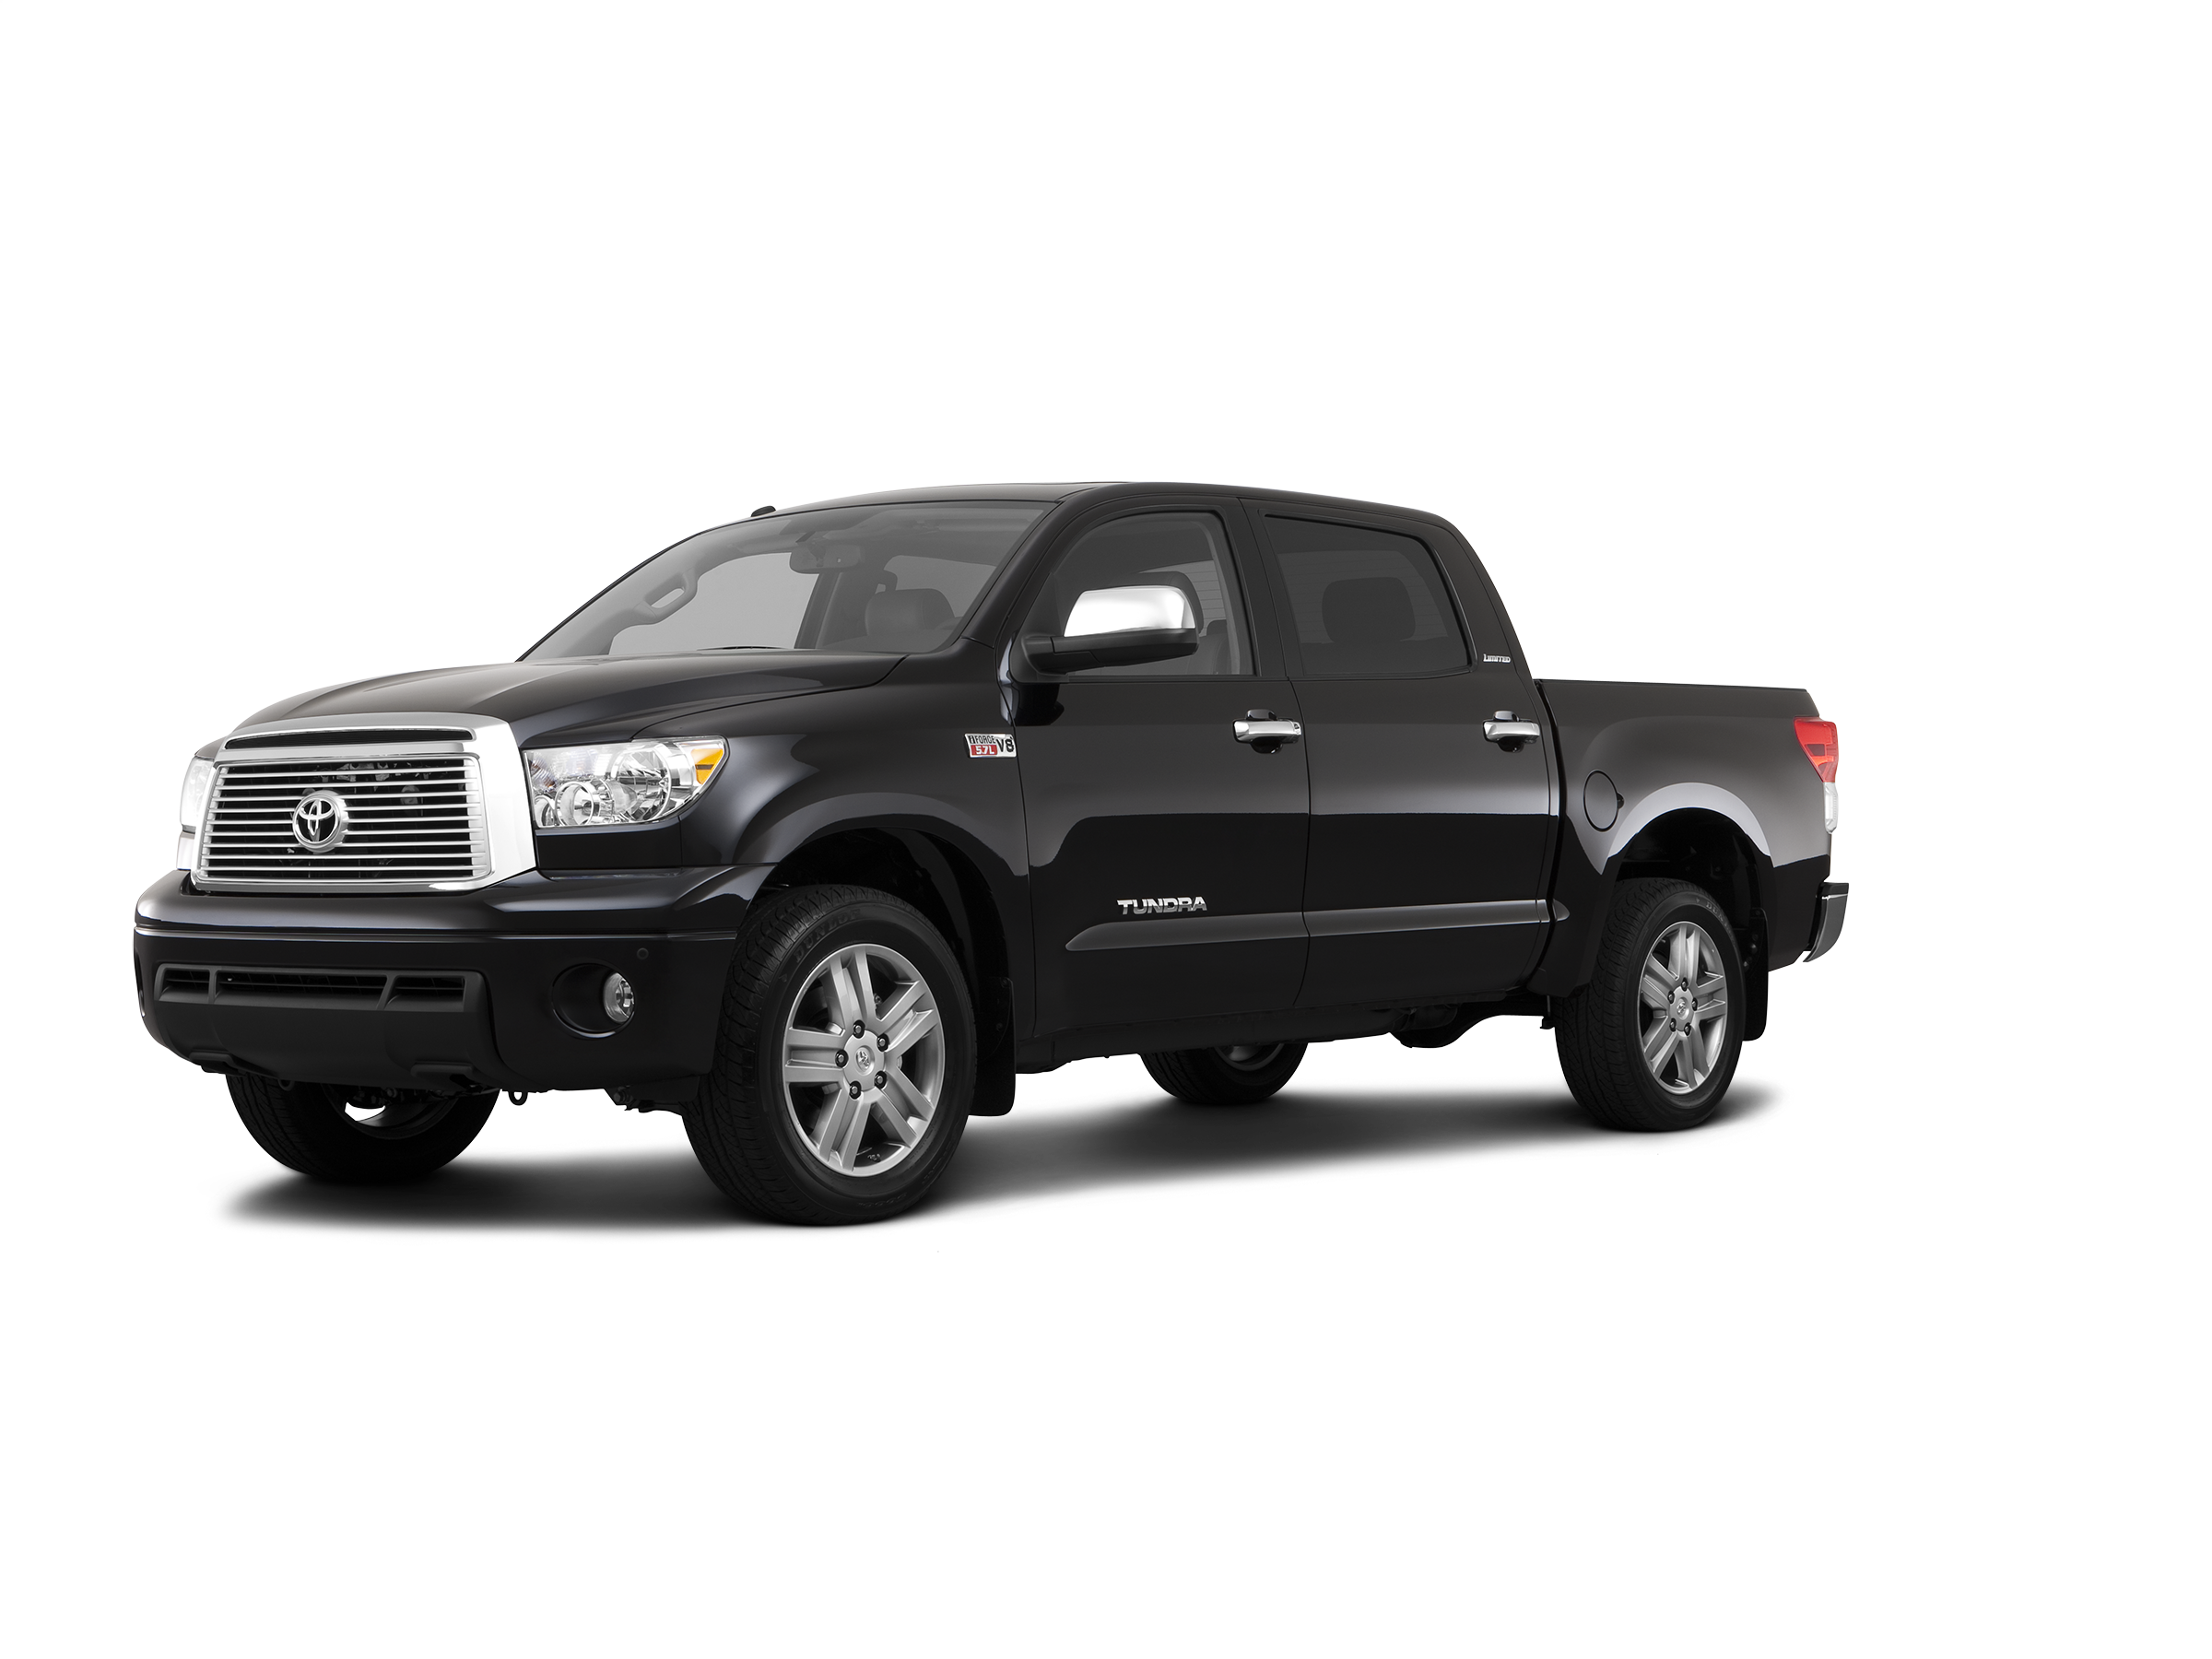 2013 Toyota Tundra Crewmax Values And Cars For Sale Kelley Blue Book